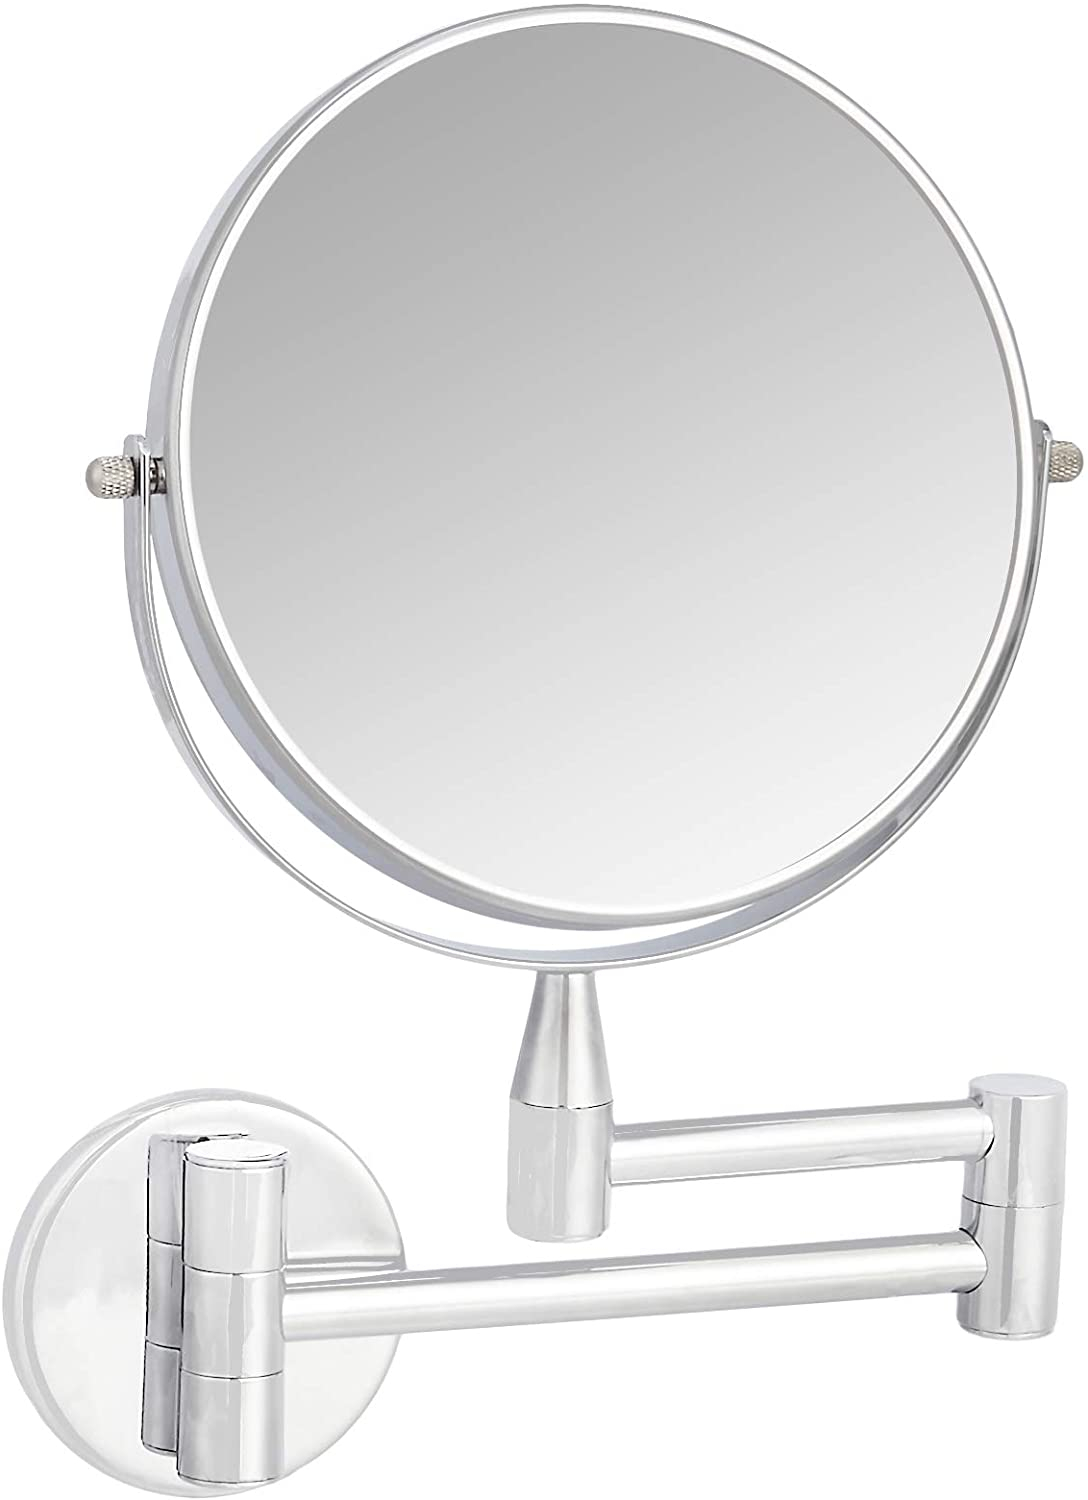 Wall Mounted Vanity Mirror - 1X/5X Magnification, Chrome, Ultra Clear Magnifying Vanity Mirror, Bathroom Mirror